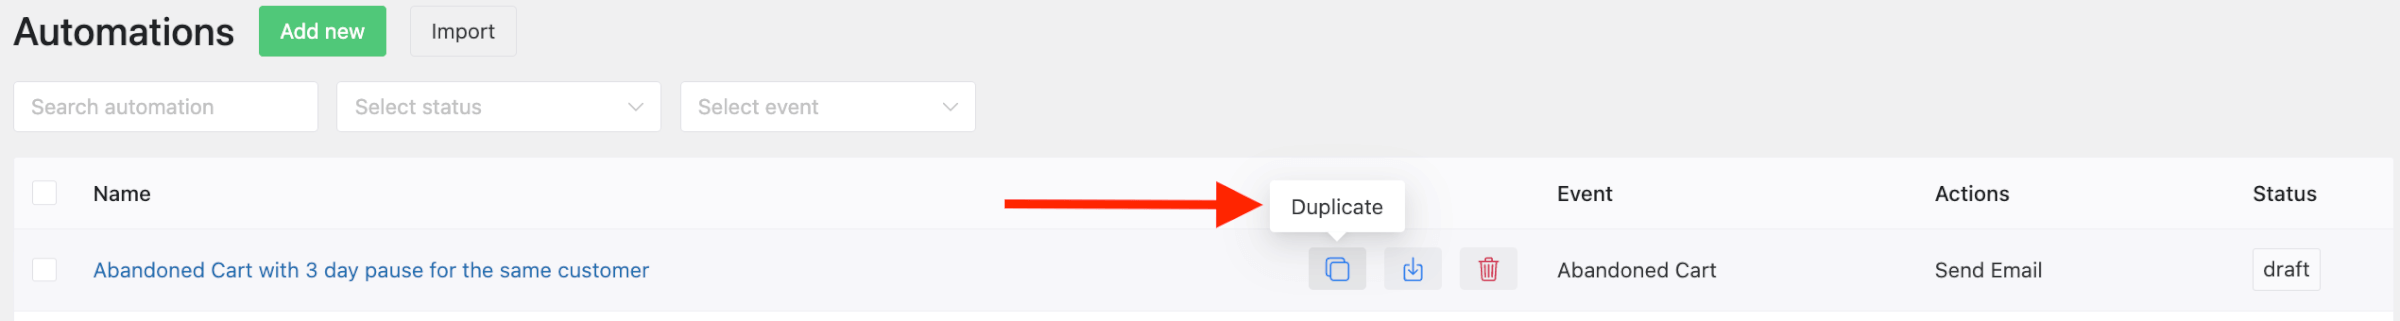 Duplicate WooCommerce automations